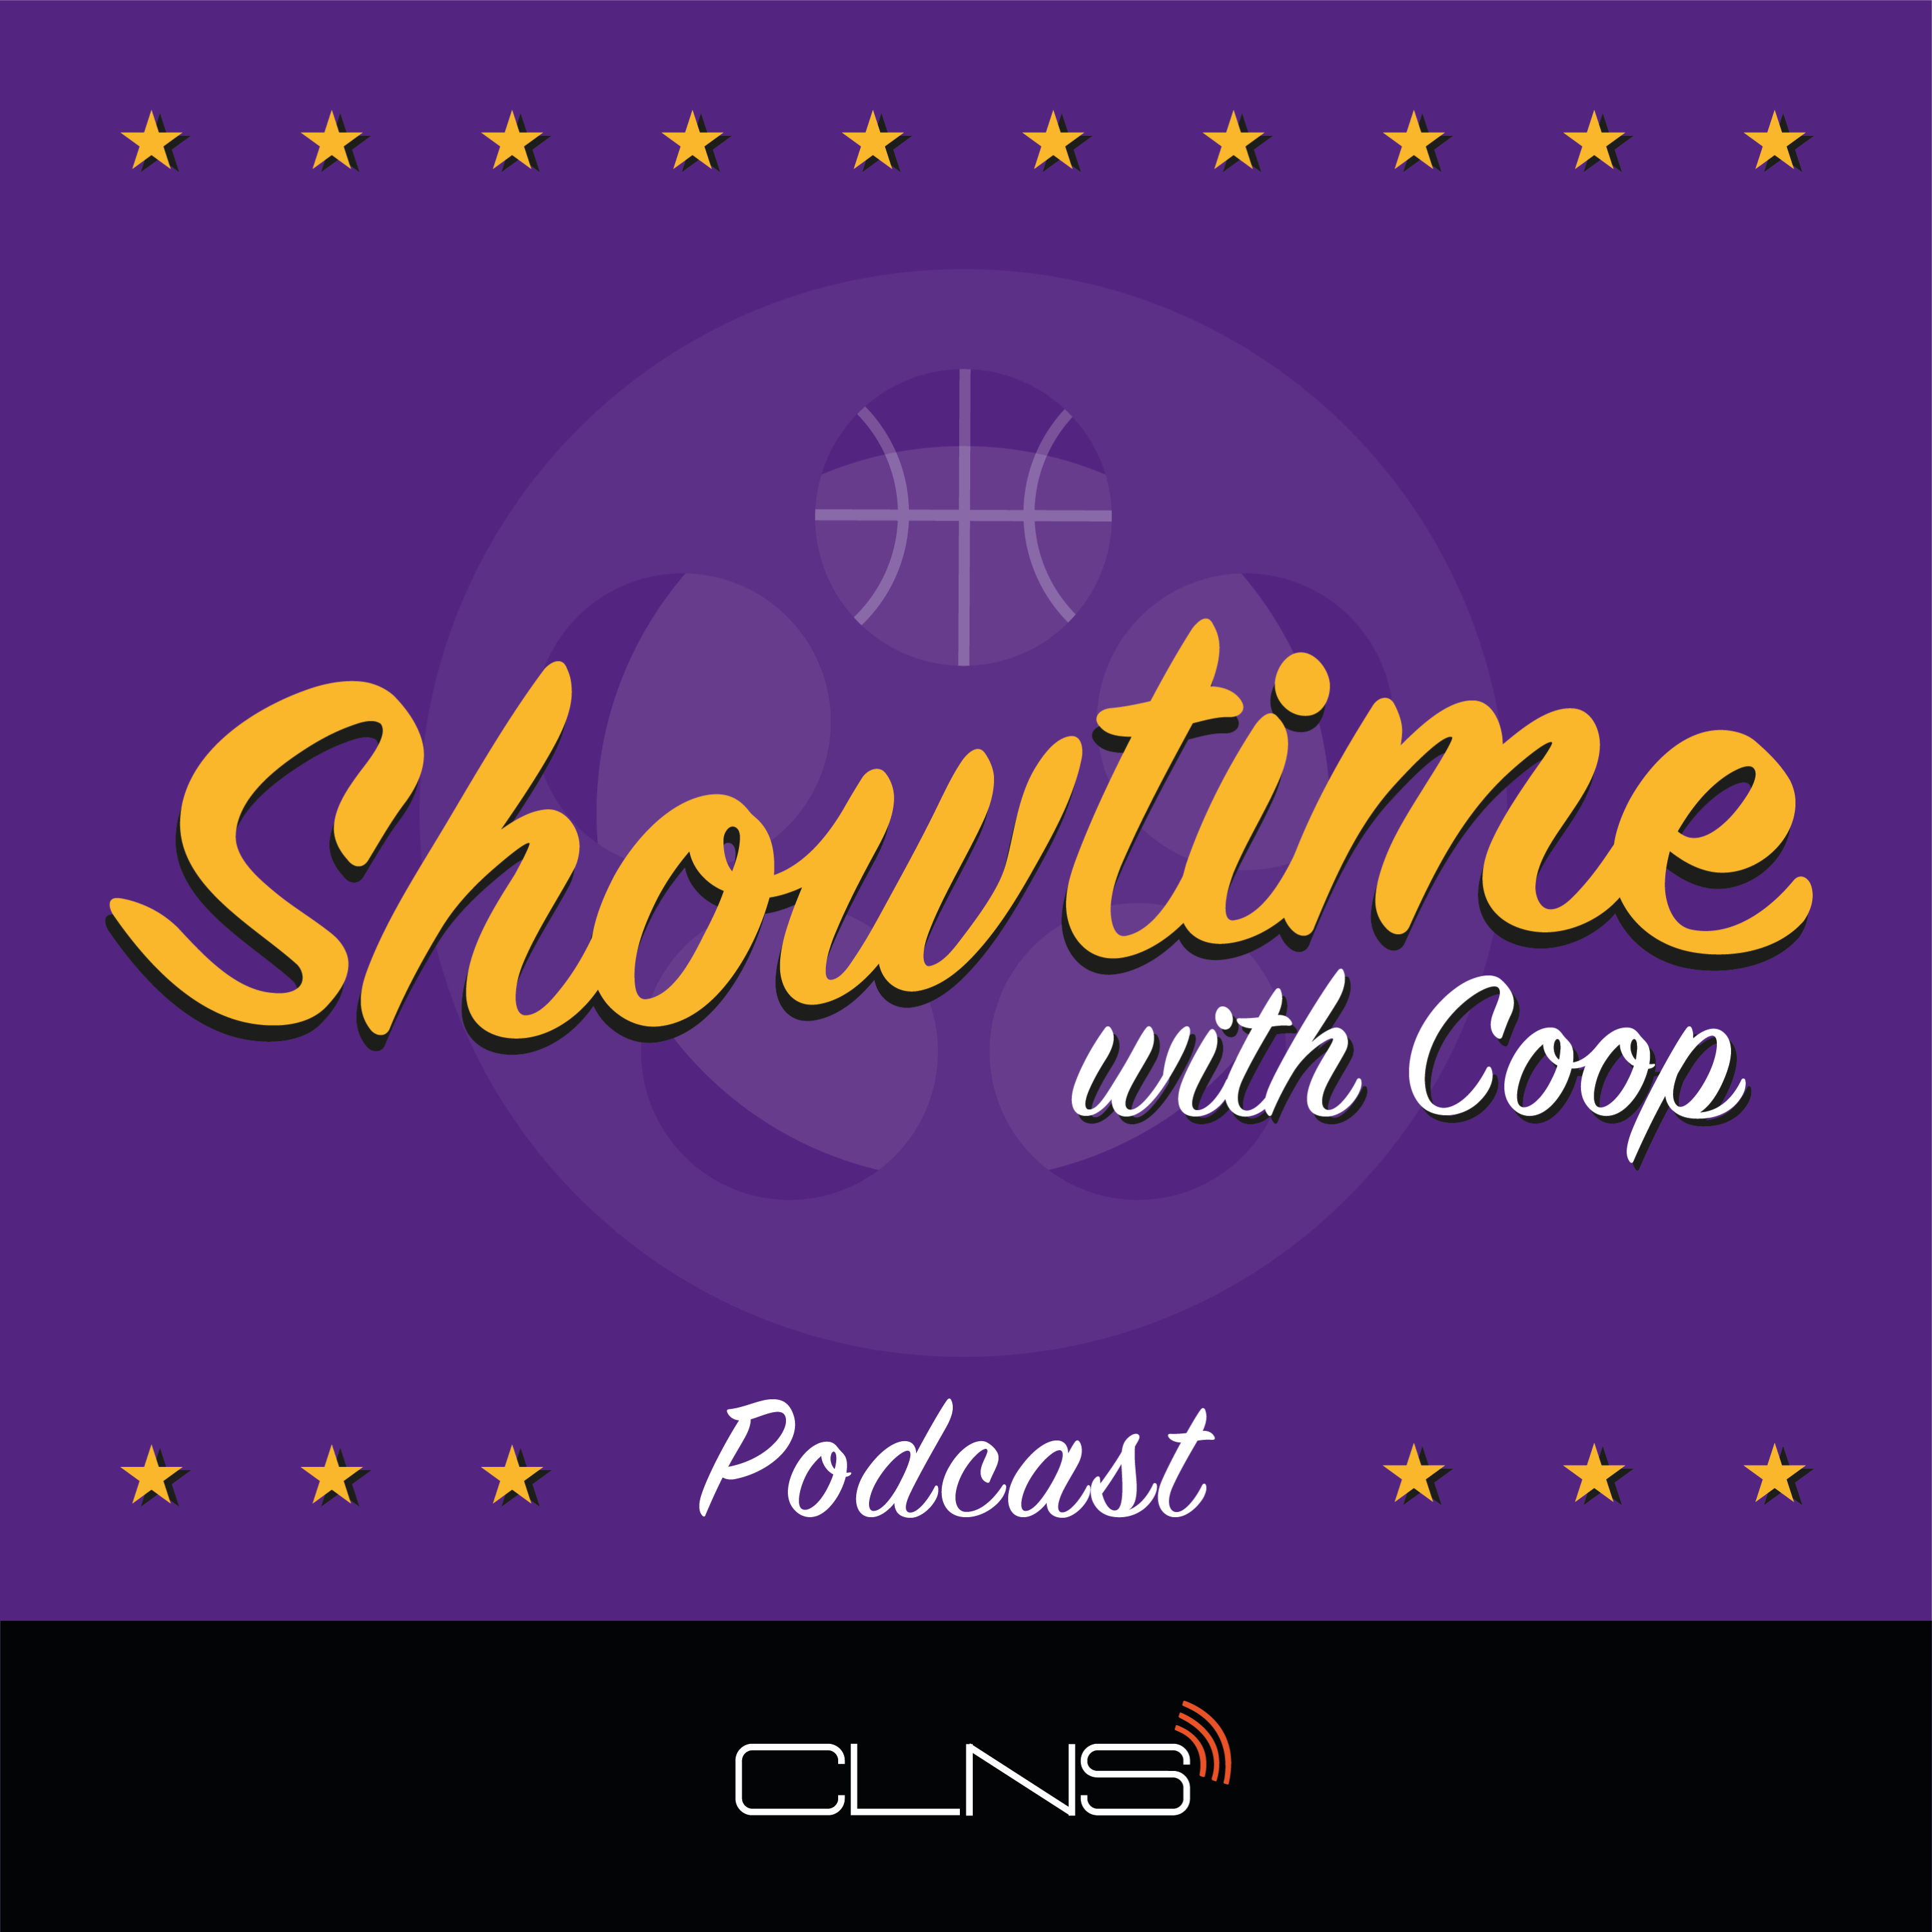 The Showtime Podcast with Lakers Legend Coop